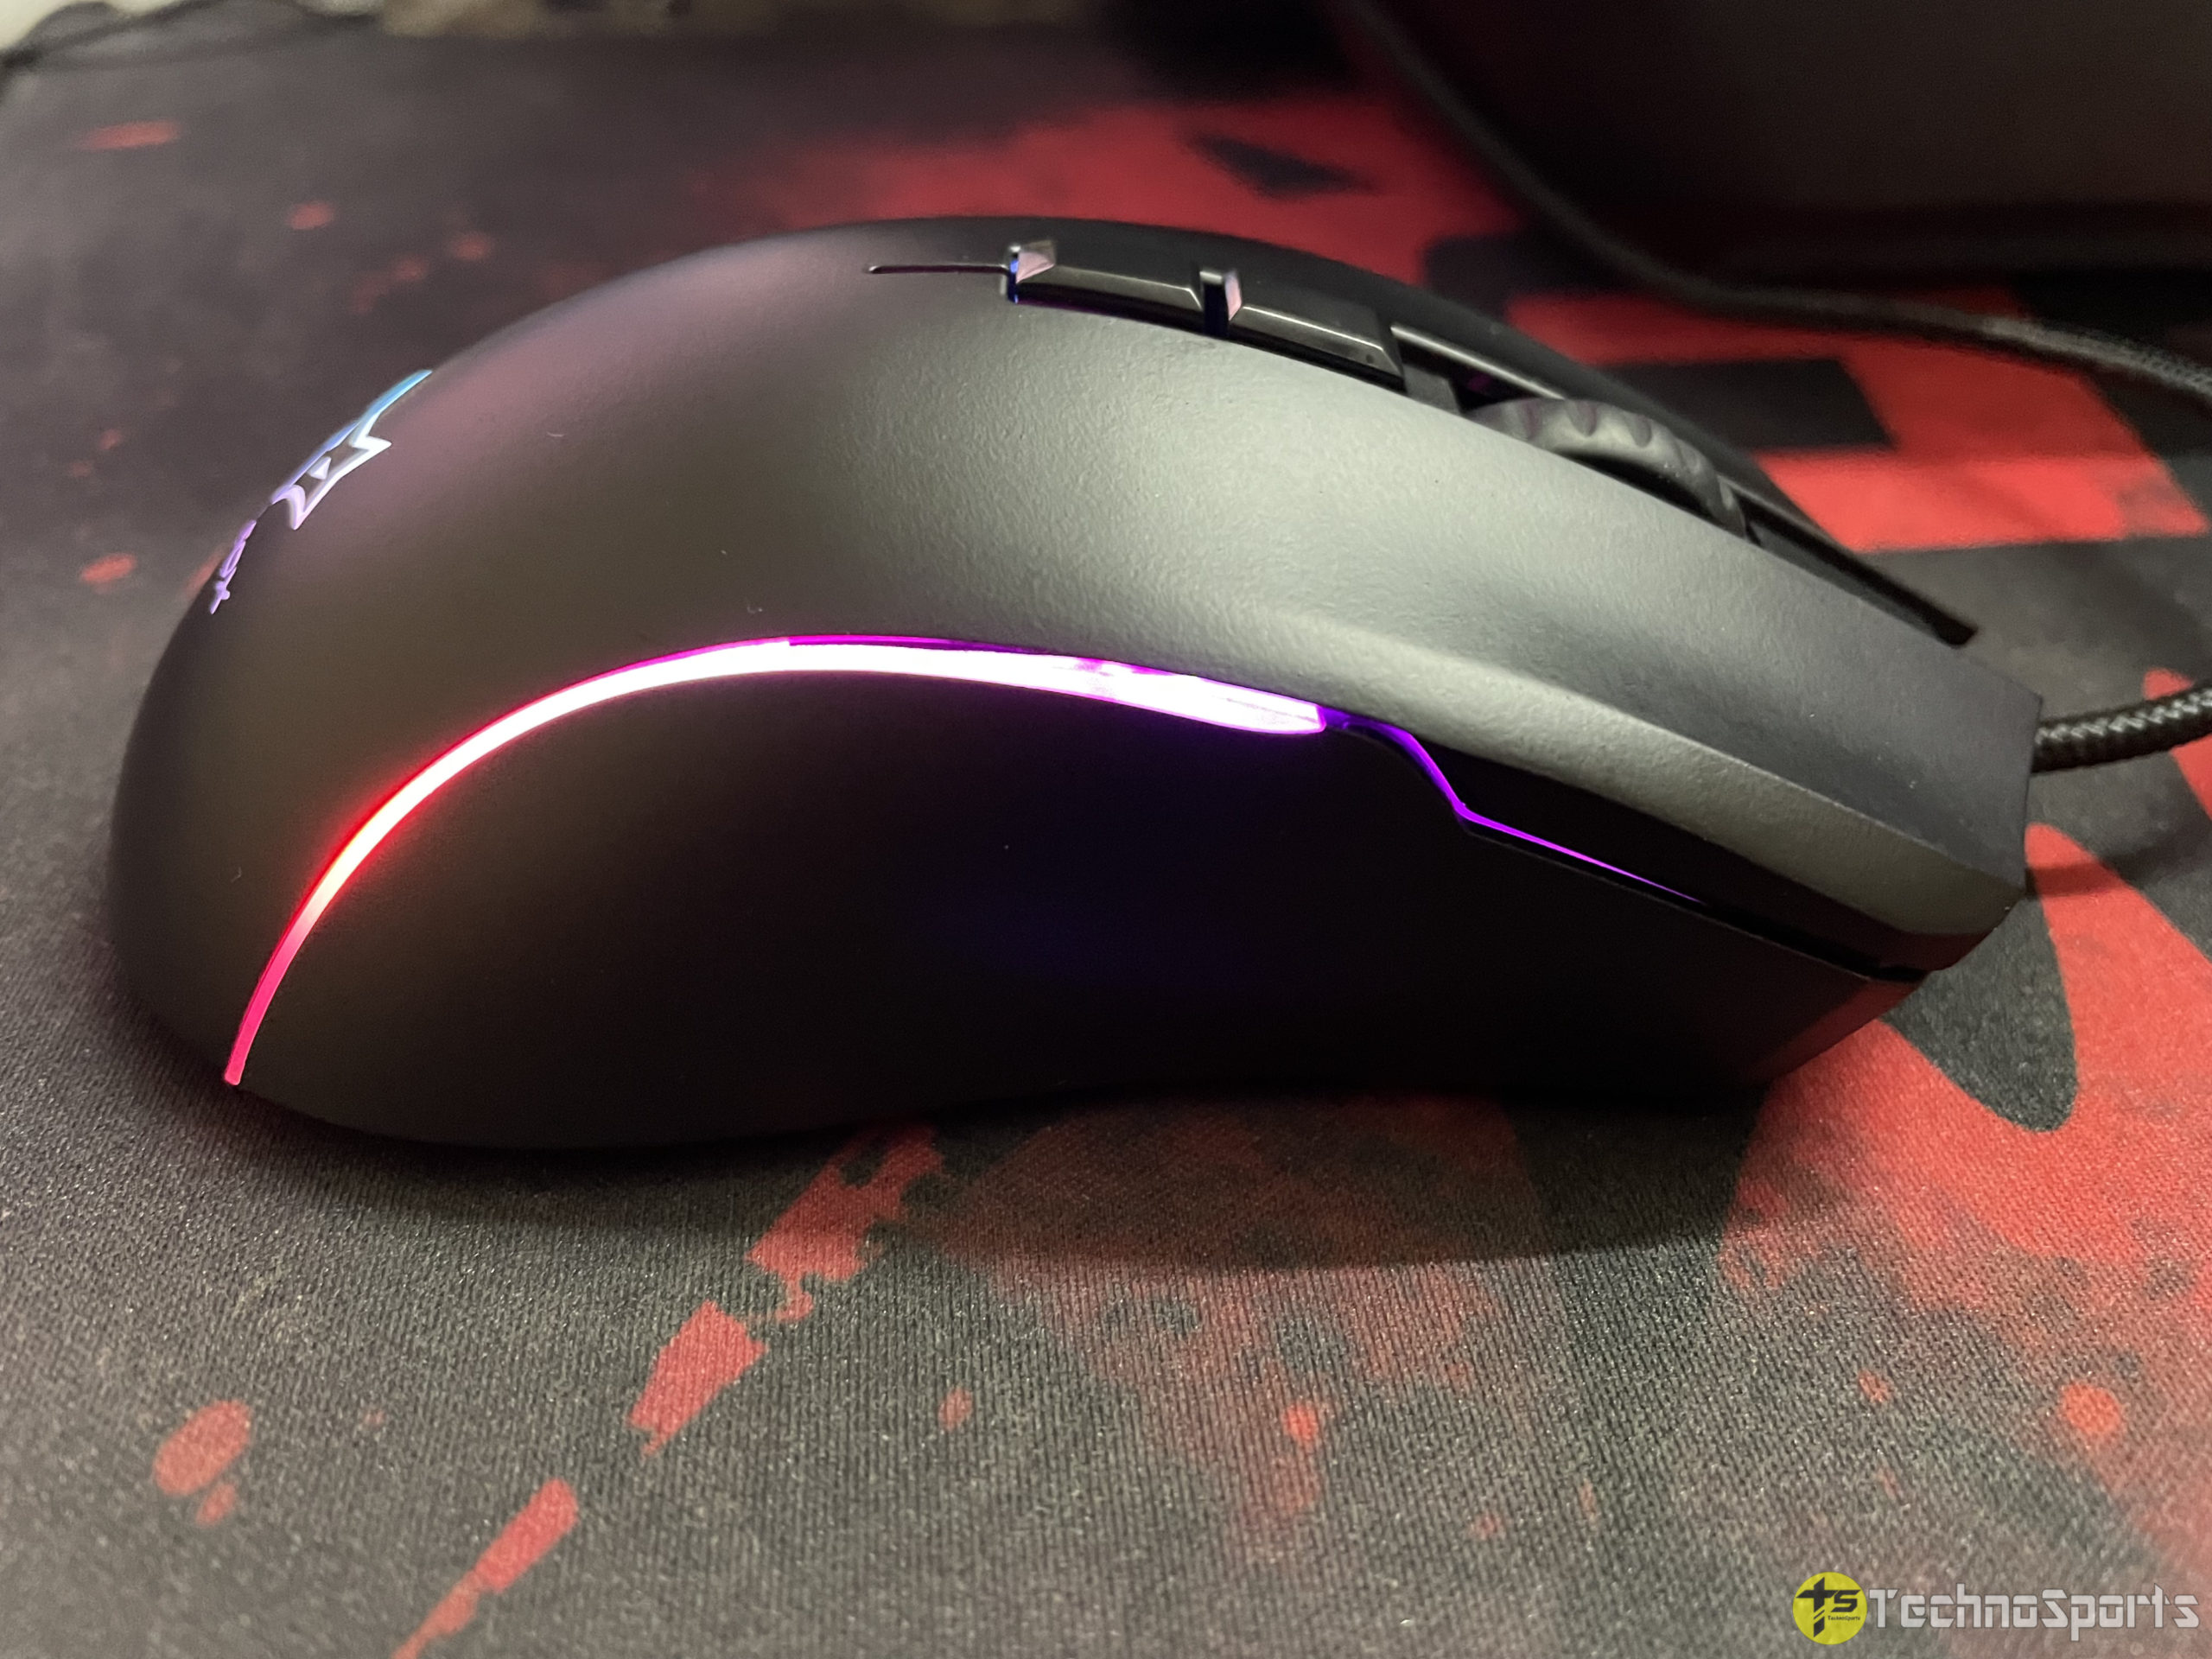 gamingmouse11new scaled Amkette EvoFox Phantom Pro Gaming Mouse review: Absolutely worth it for just Rs 799